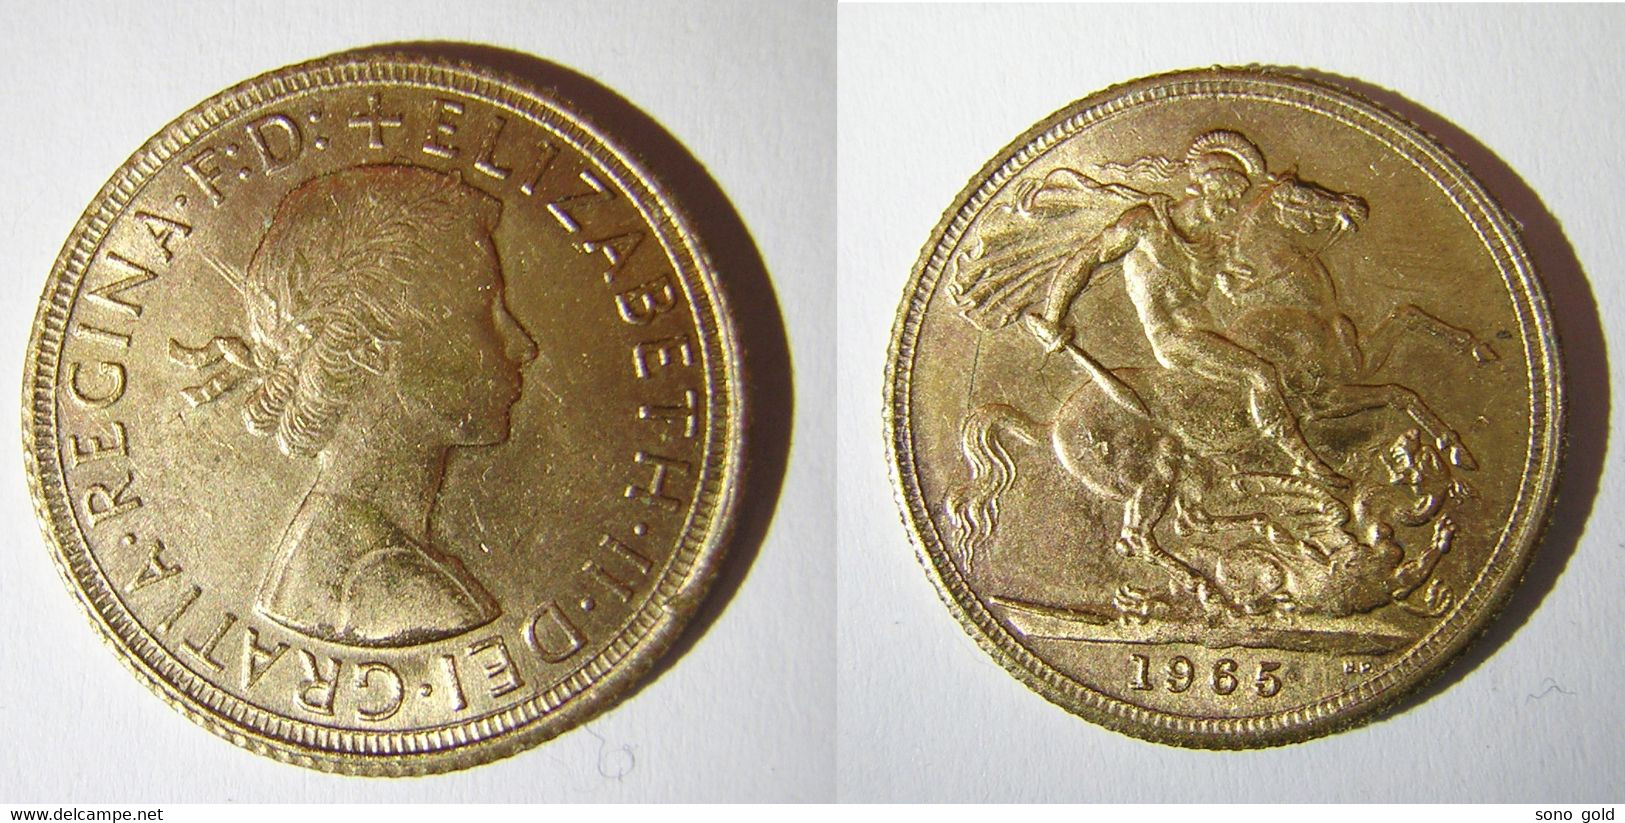 VERY NICE 1965 Sovereign Gold Sterling FAKE - A Identificar